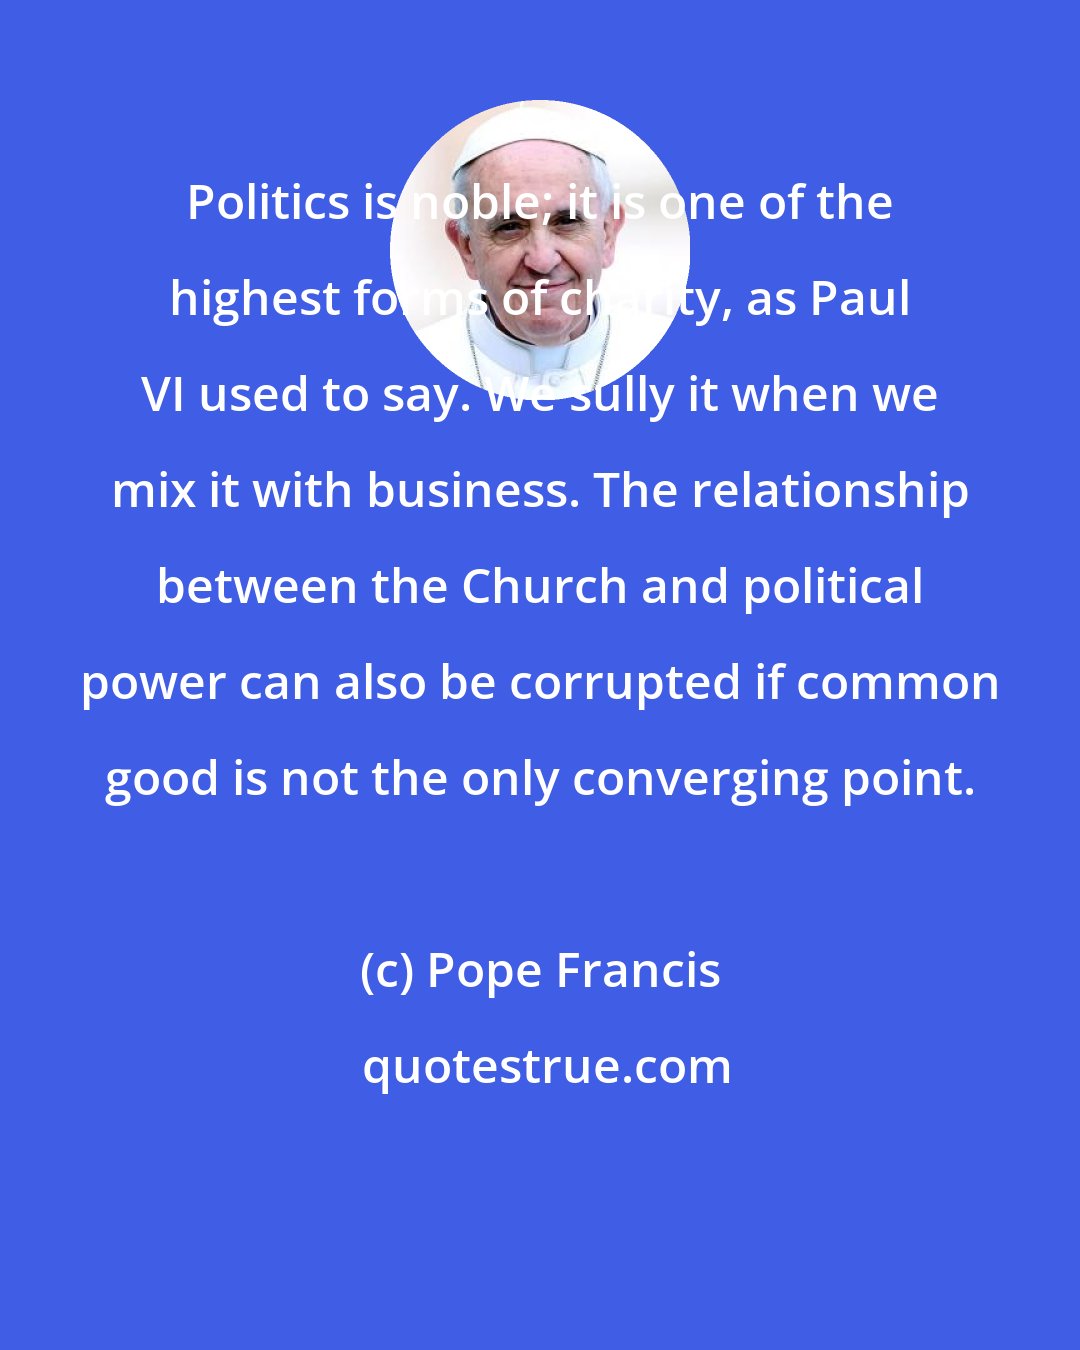 Pope Francis: Politics is noble; it is one of the highest forms of charity, as Paul VI used to say. We sully it when we mix it with business. The relationship between the Church and political power can also be corrupted if common good is not the only converging point.